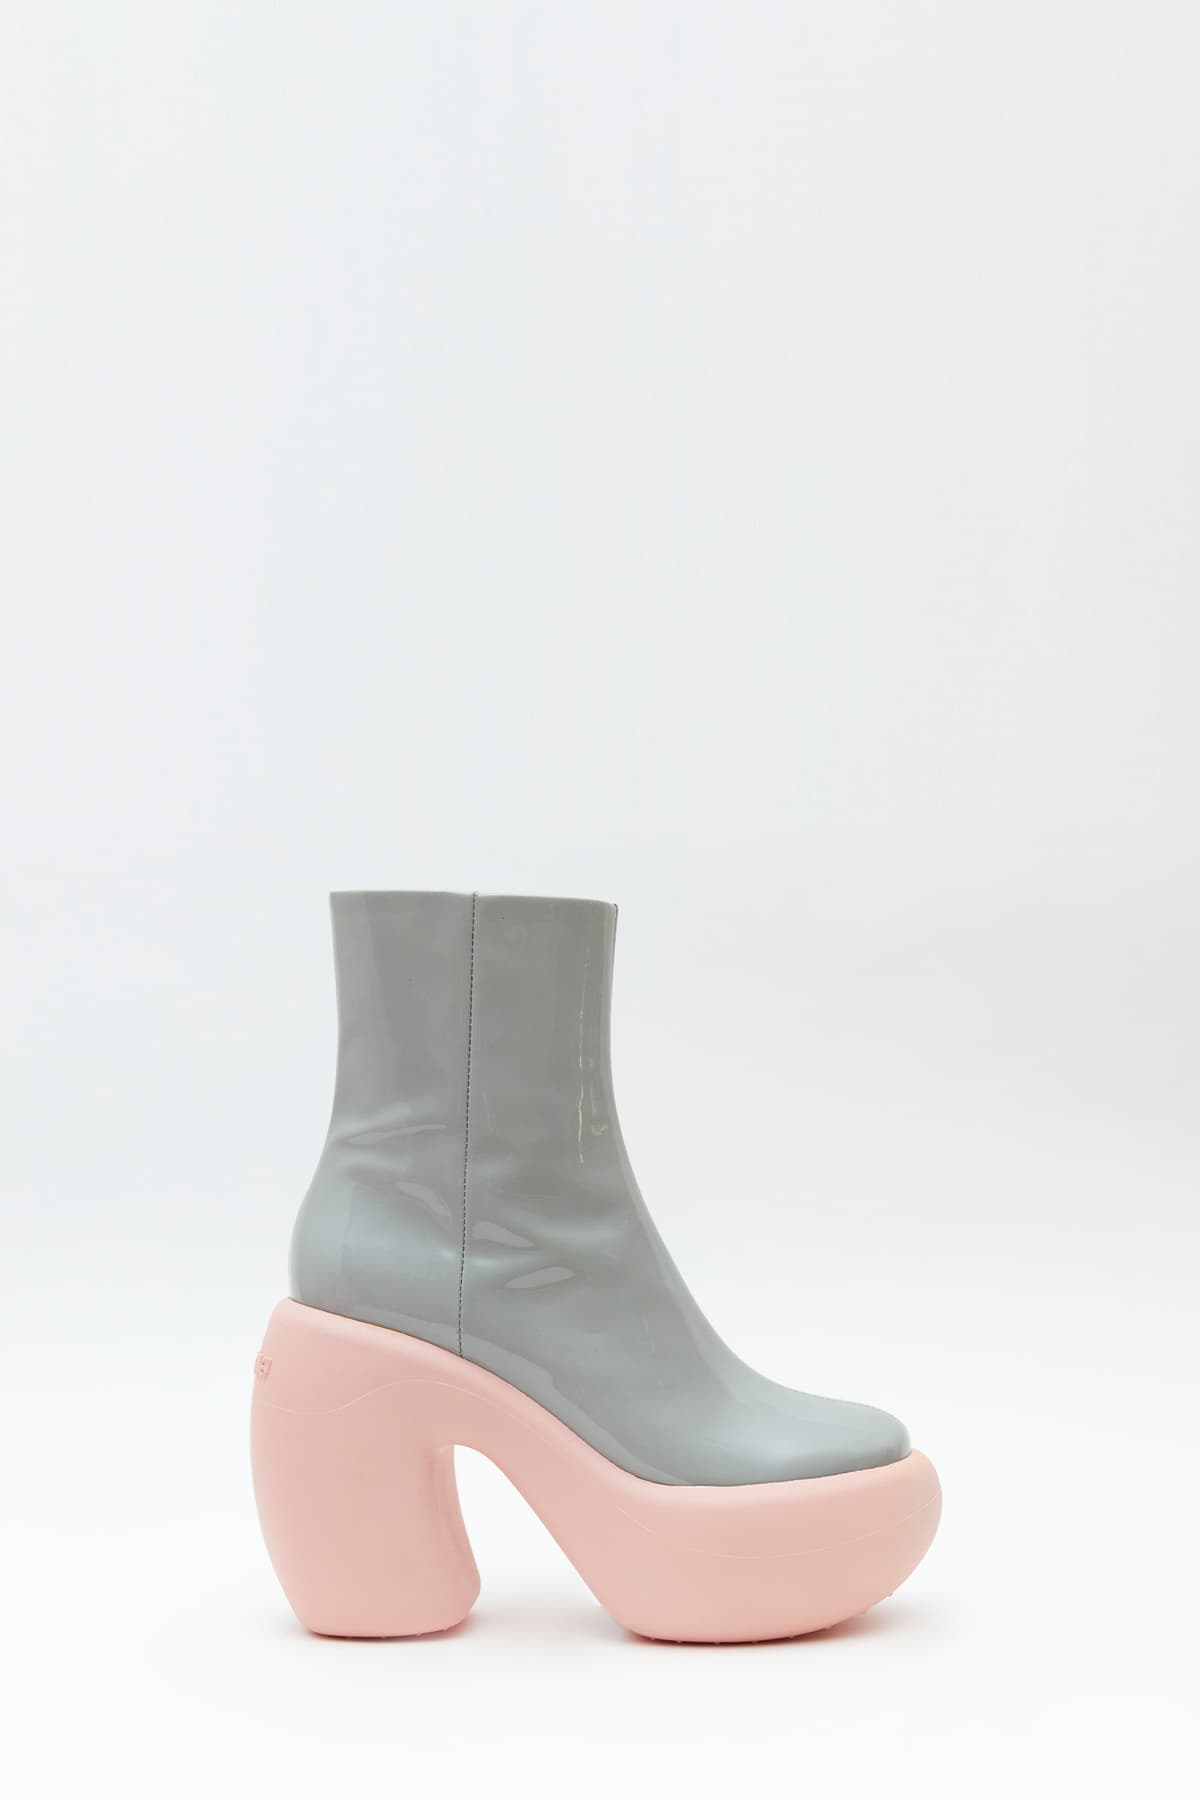 Sideview of Honey Bubble ankle boot in grey with pink rubber sole from the Haus of Honey fall-winter 2023-24